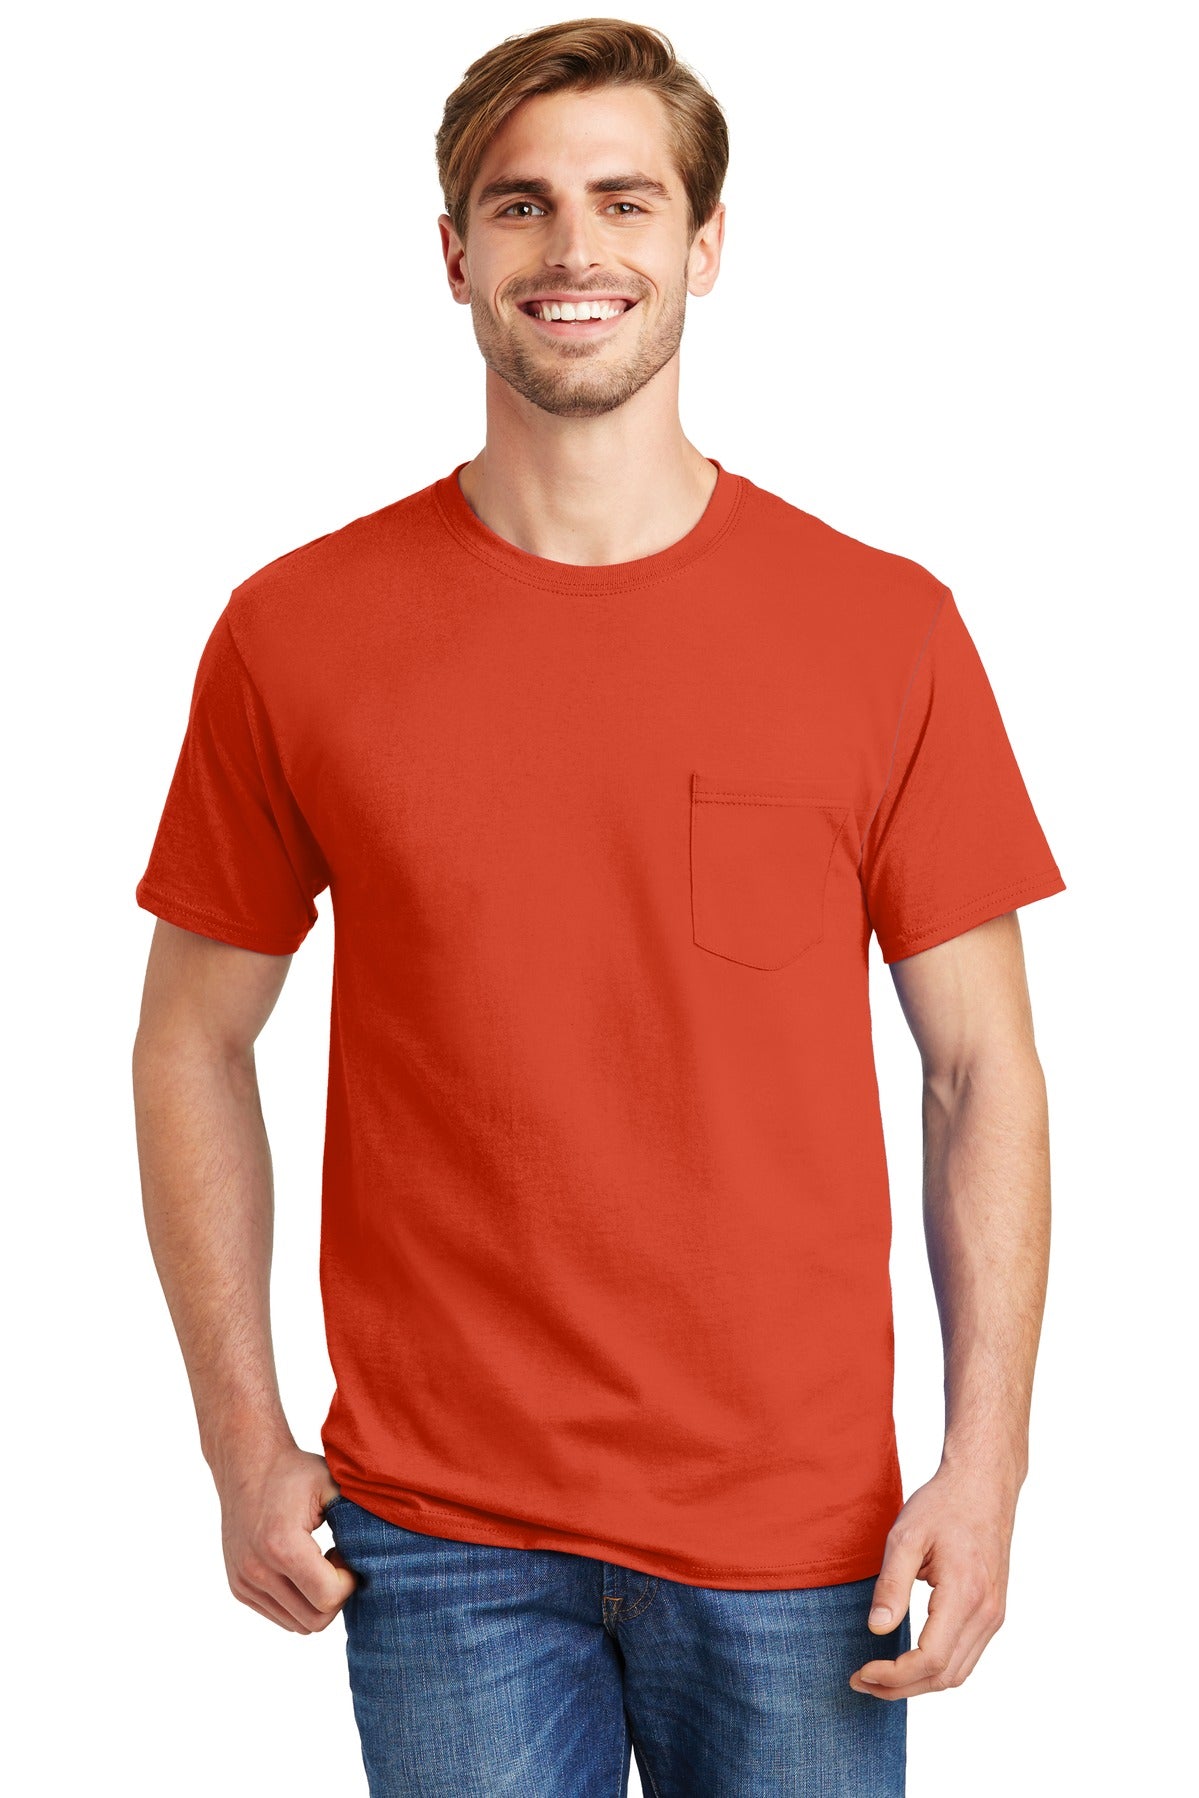 HanesÂ® - Authentic 100%  Cotton T-Shirt with Pocket.  5590